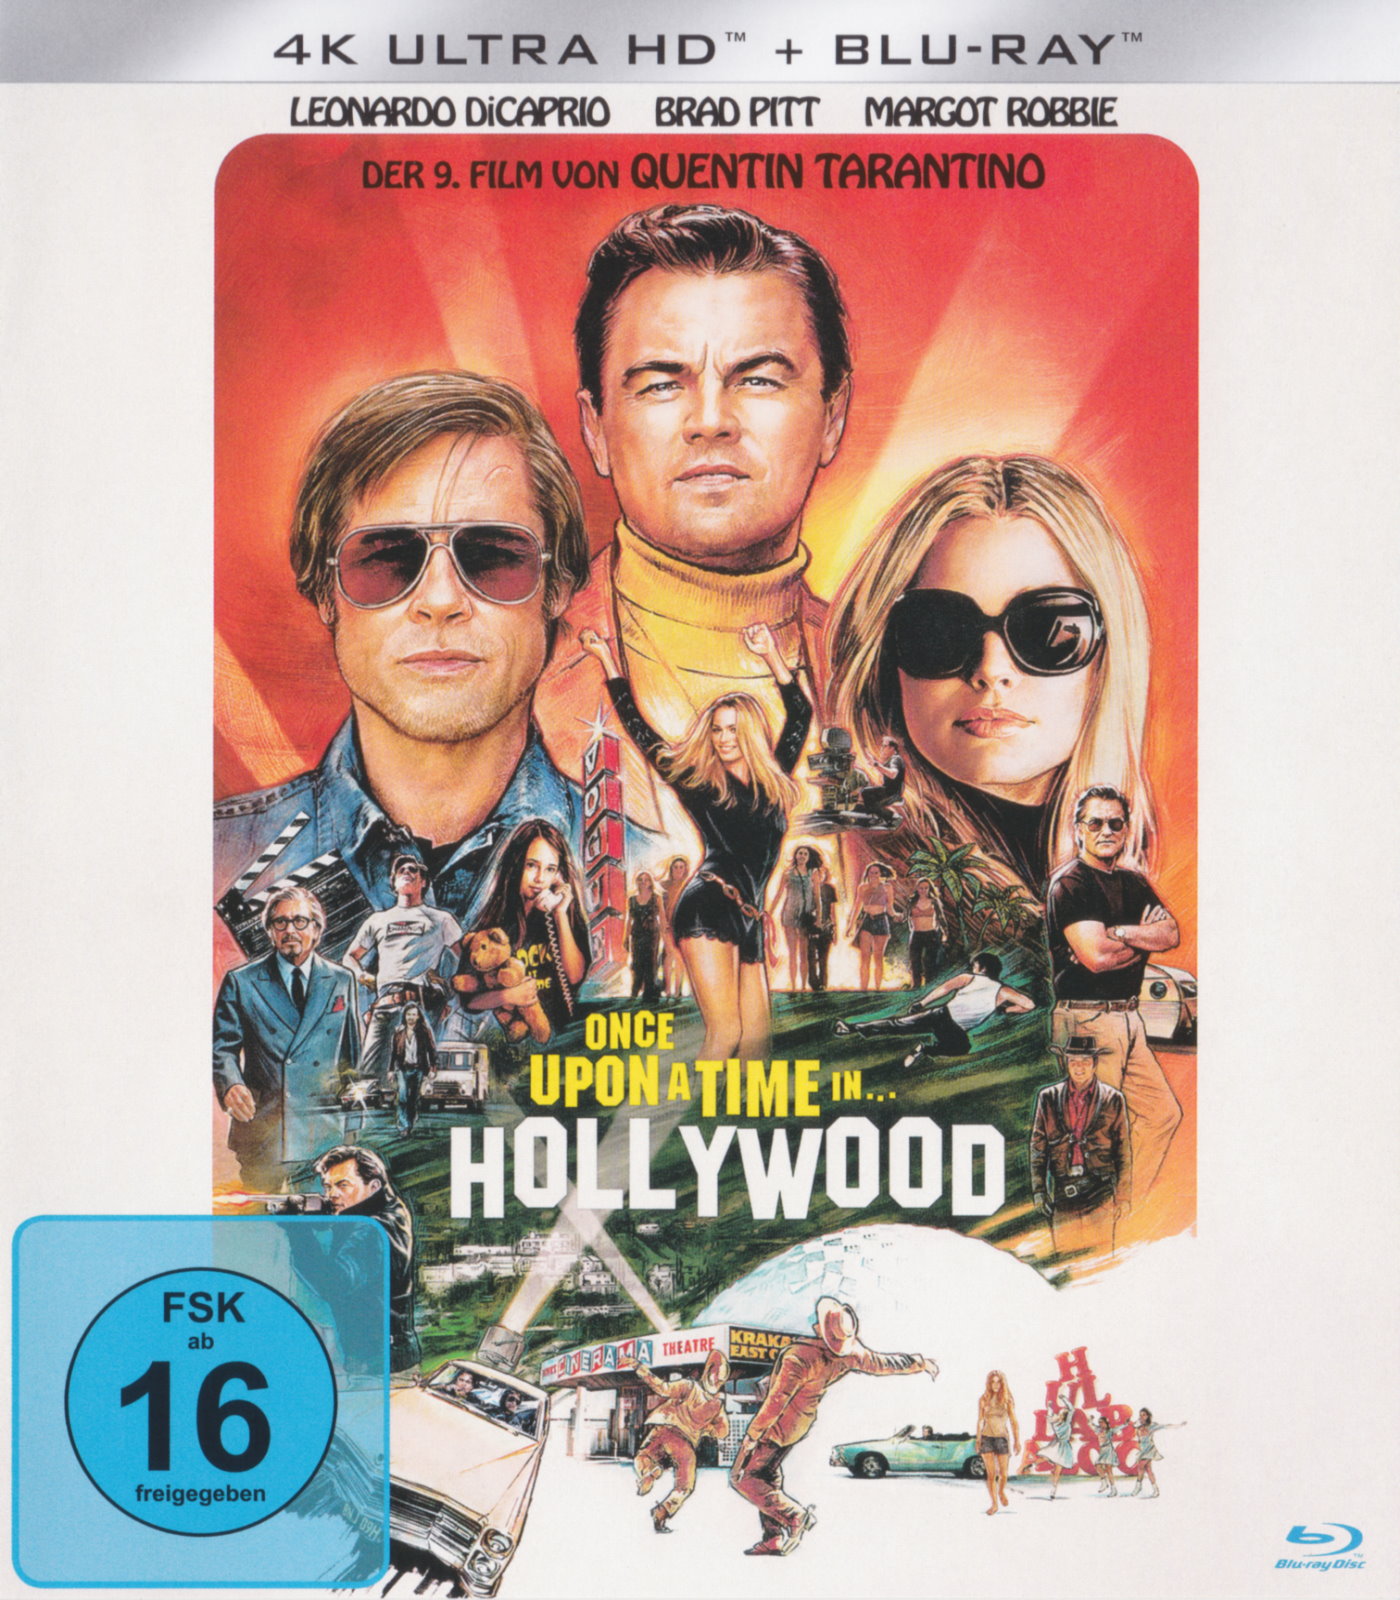 Cover - Once Upon a Time in... Hollywood.jpg